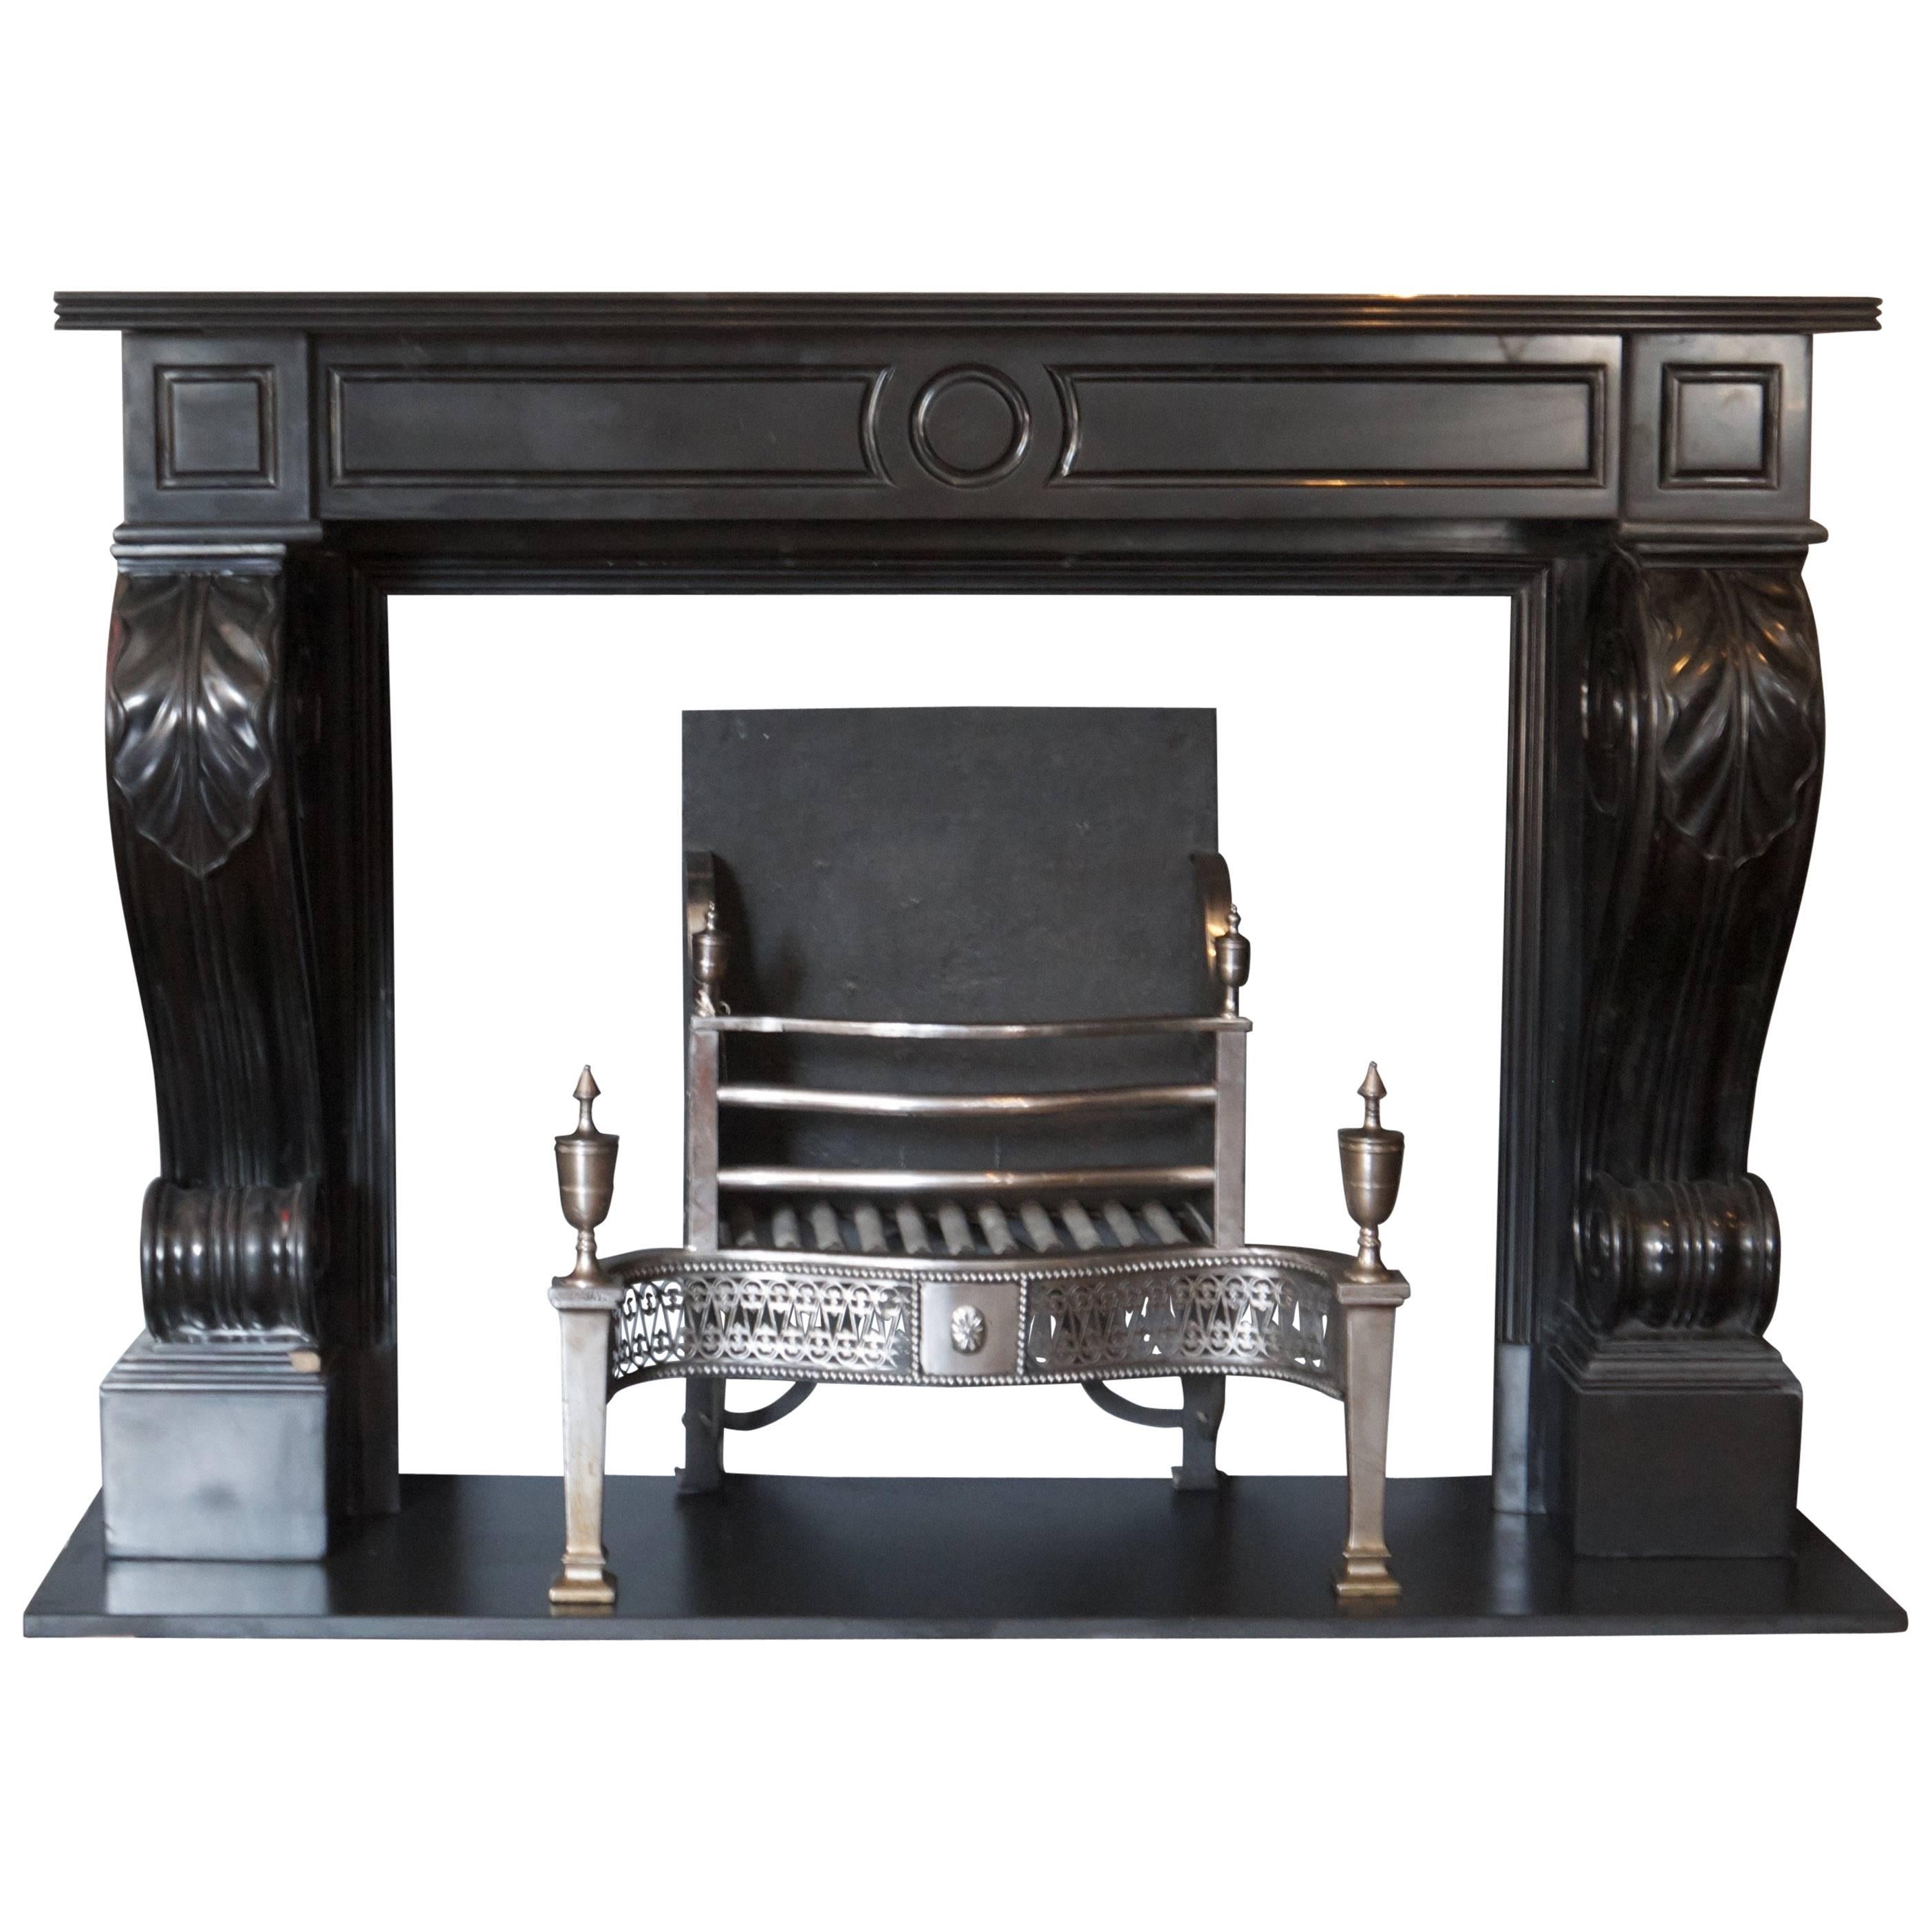 Early 19th Century, Regency Neoclassical Black Marble Surround